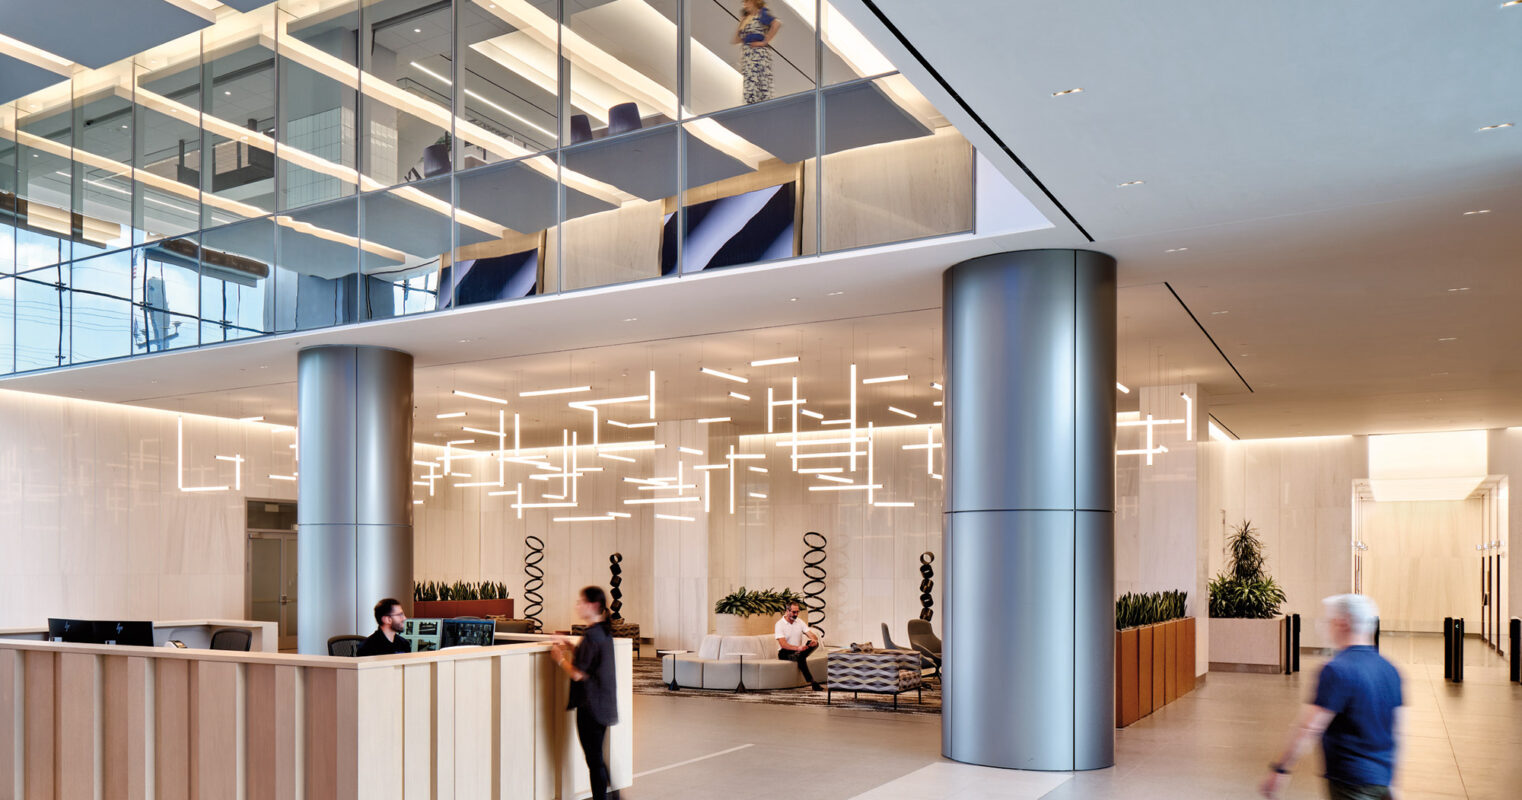 A sleek and modern corporate lobby featuring a reception desk, stylish hanging lights, and multi-level walkways with glass balustrades, with people entering and moving about the space.